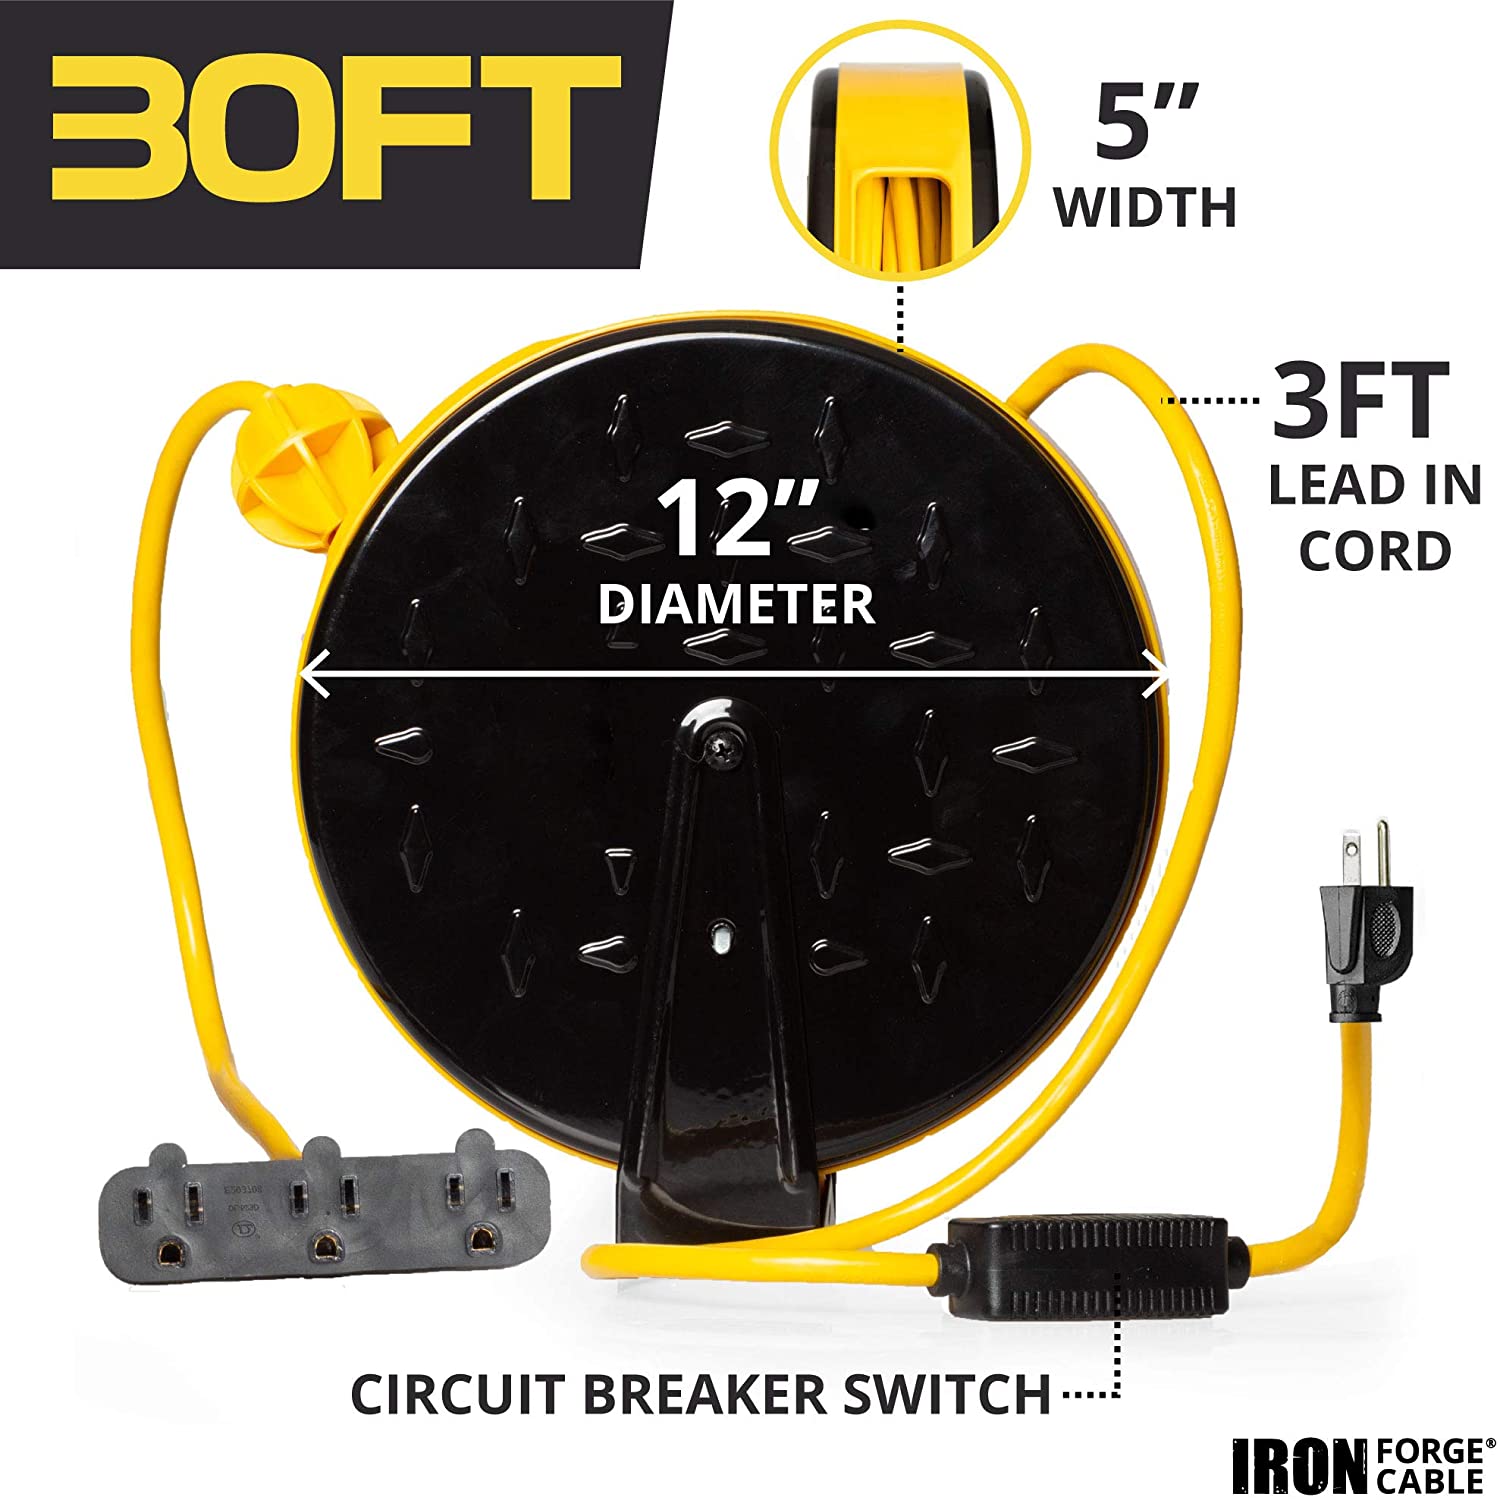 Retractable Extension Cord Reel with 3 Electrical Power Outlets - Perf -  iron forge tools